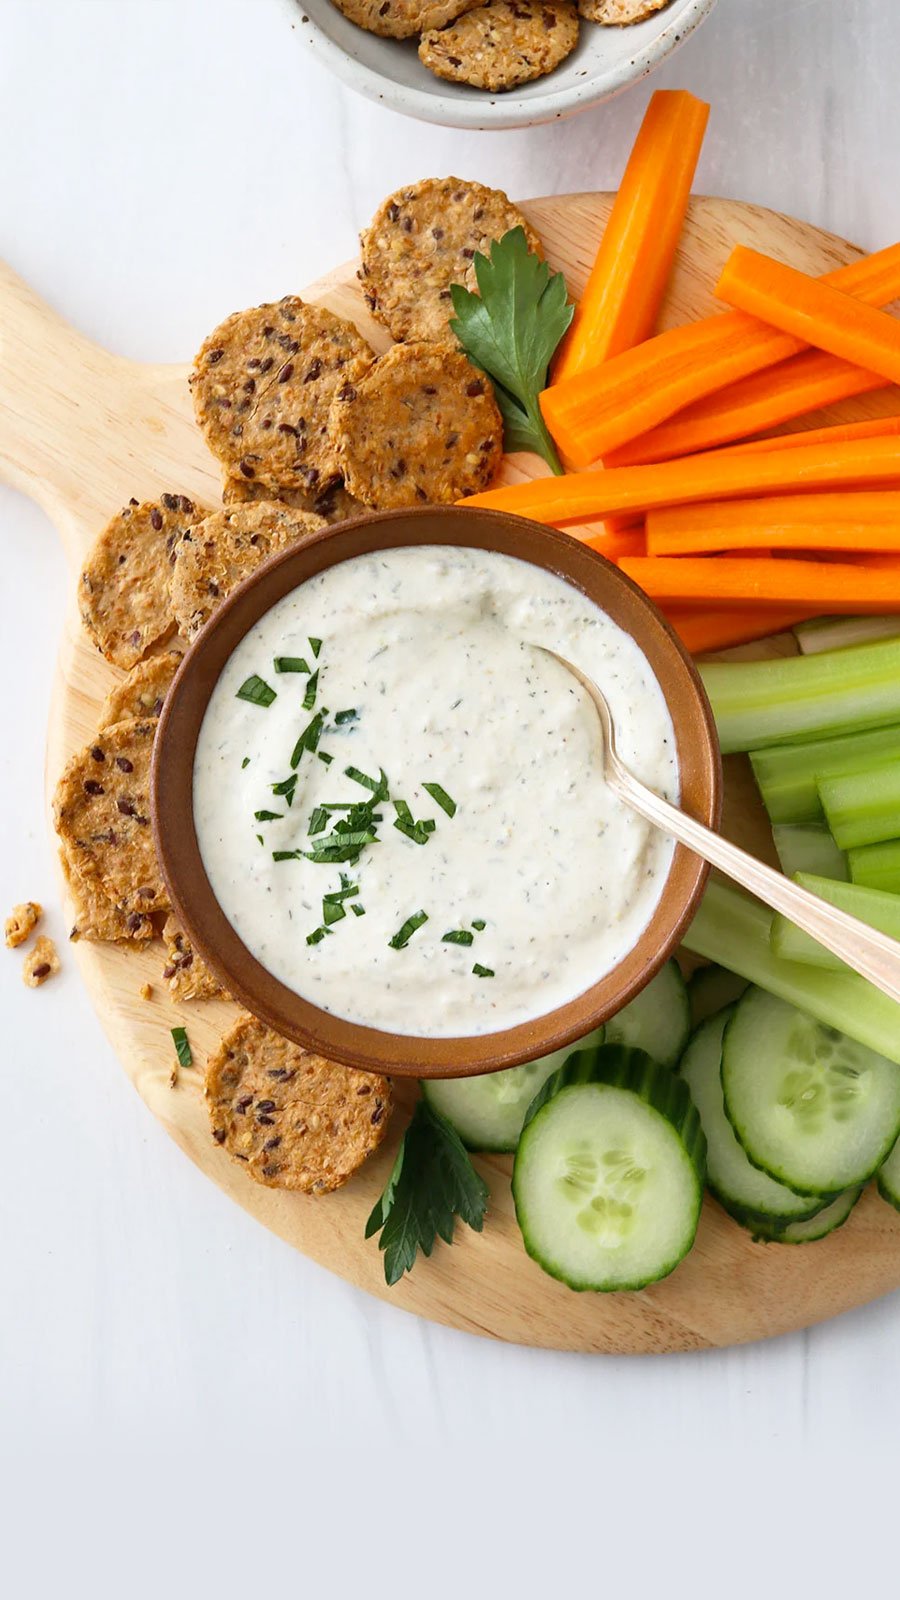 cottage cheese dip in a bowl served with crackers and veggies.